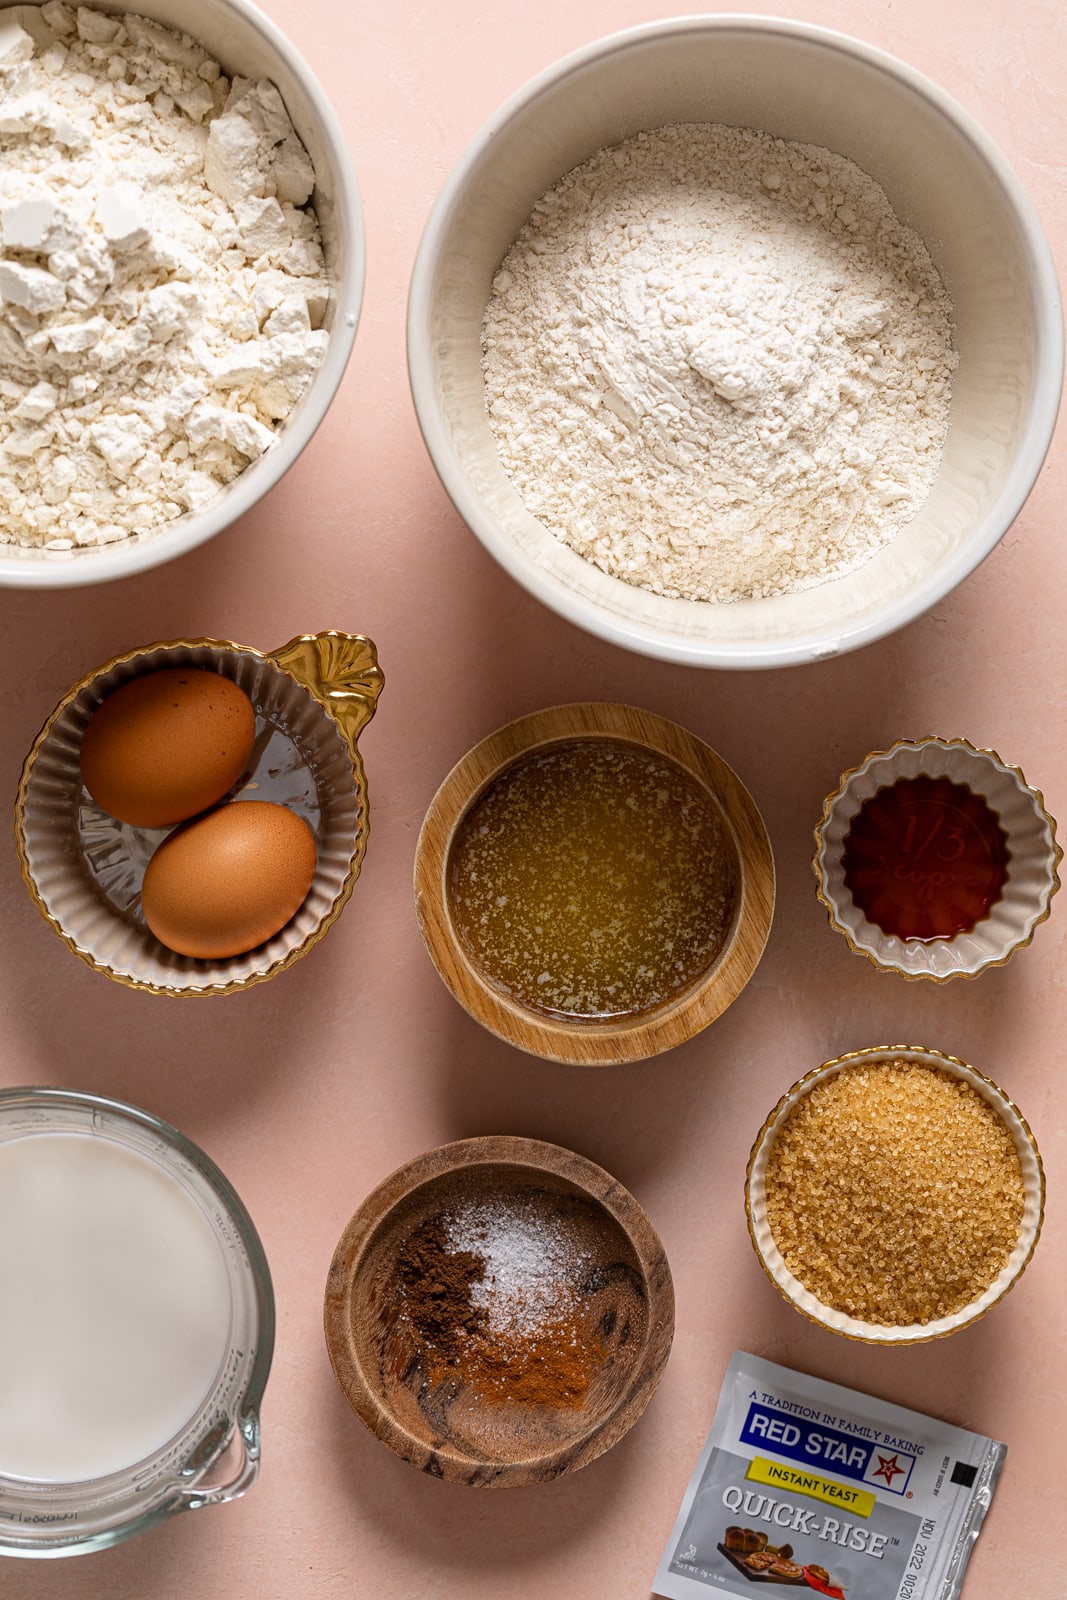 Ingredients including eggs, flour, and yeast.